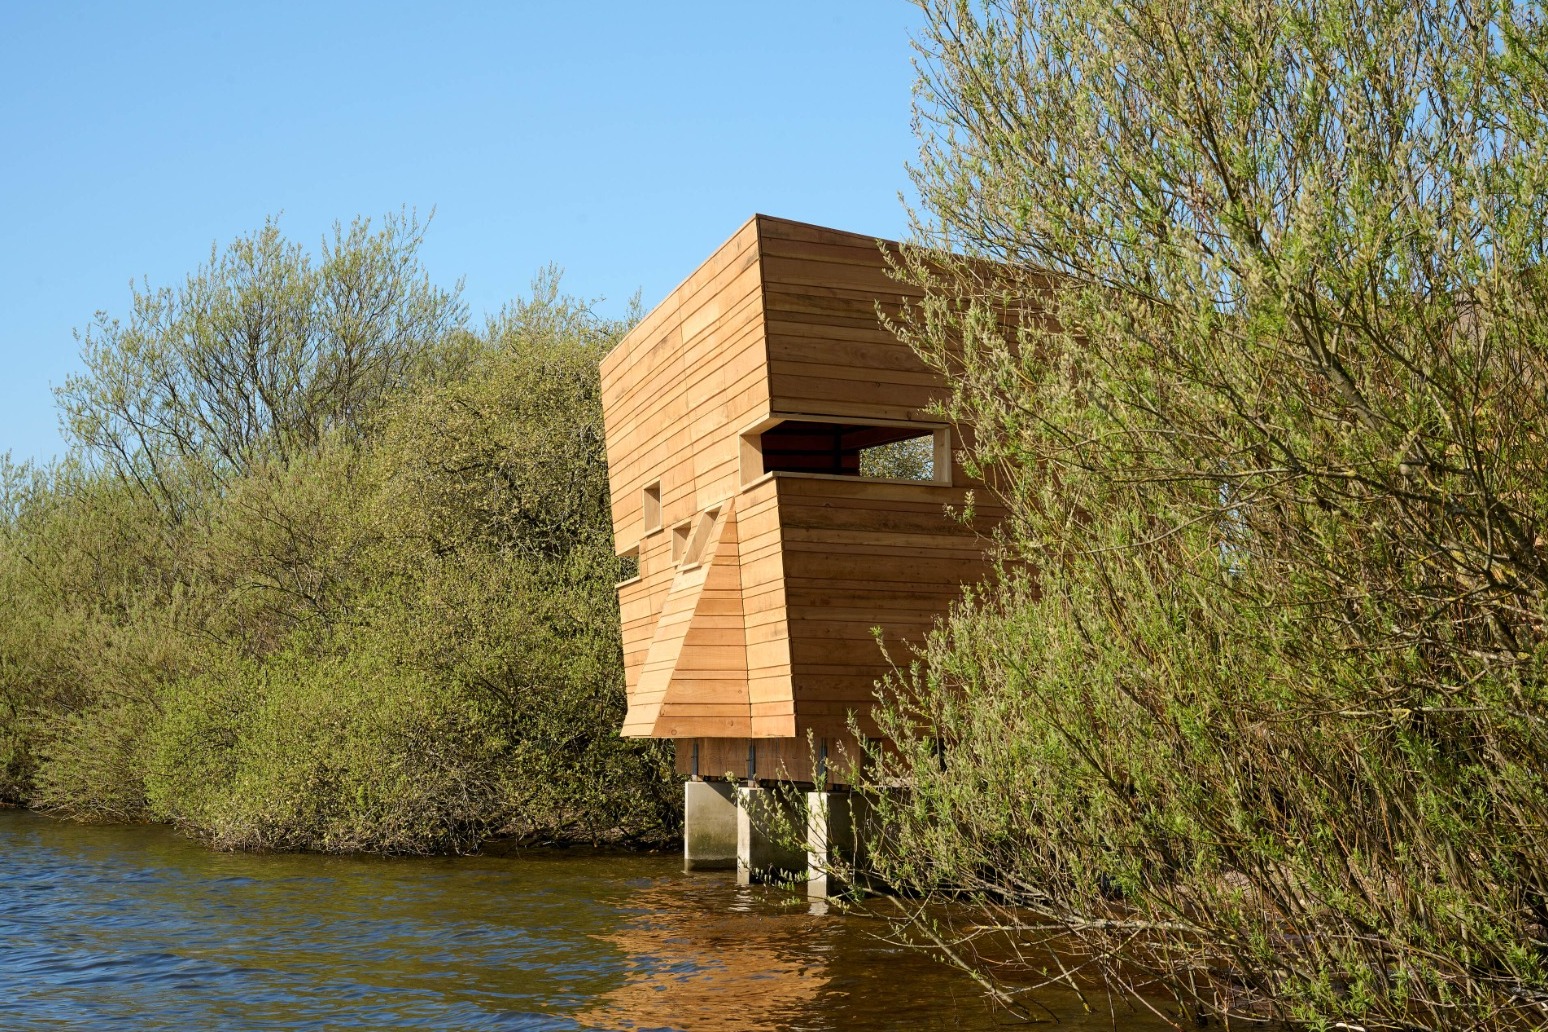 Phoenix Hide rises from the ashes of devastating fire at nature reserve 